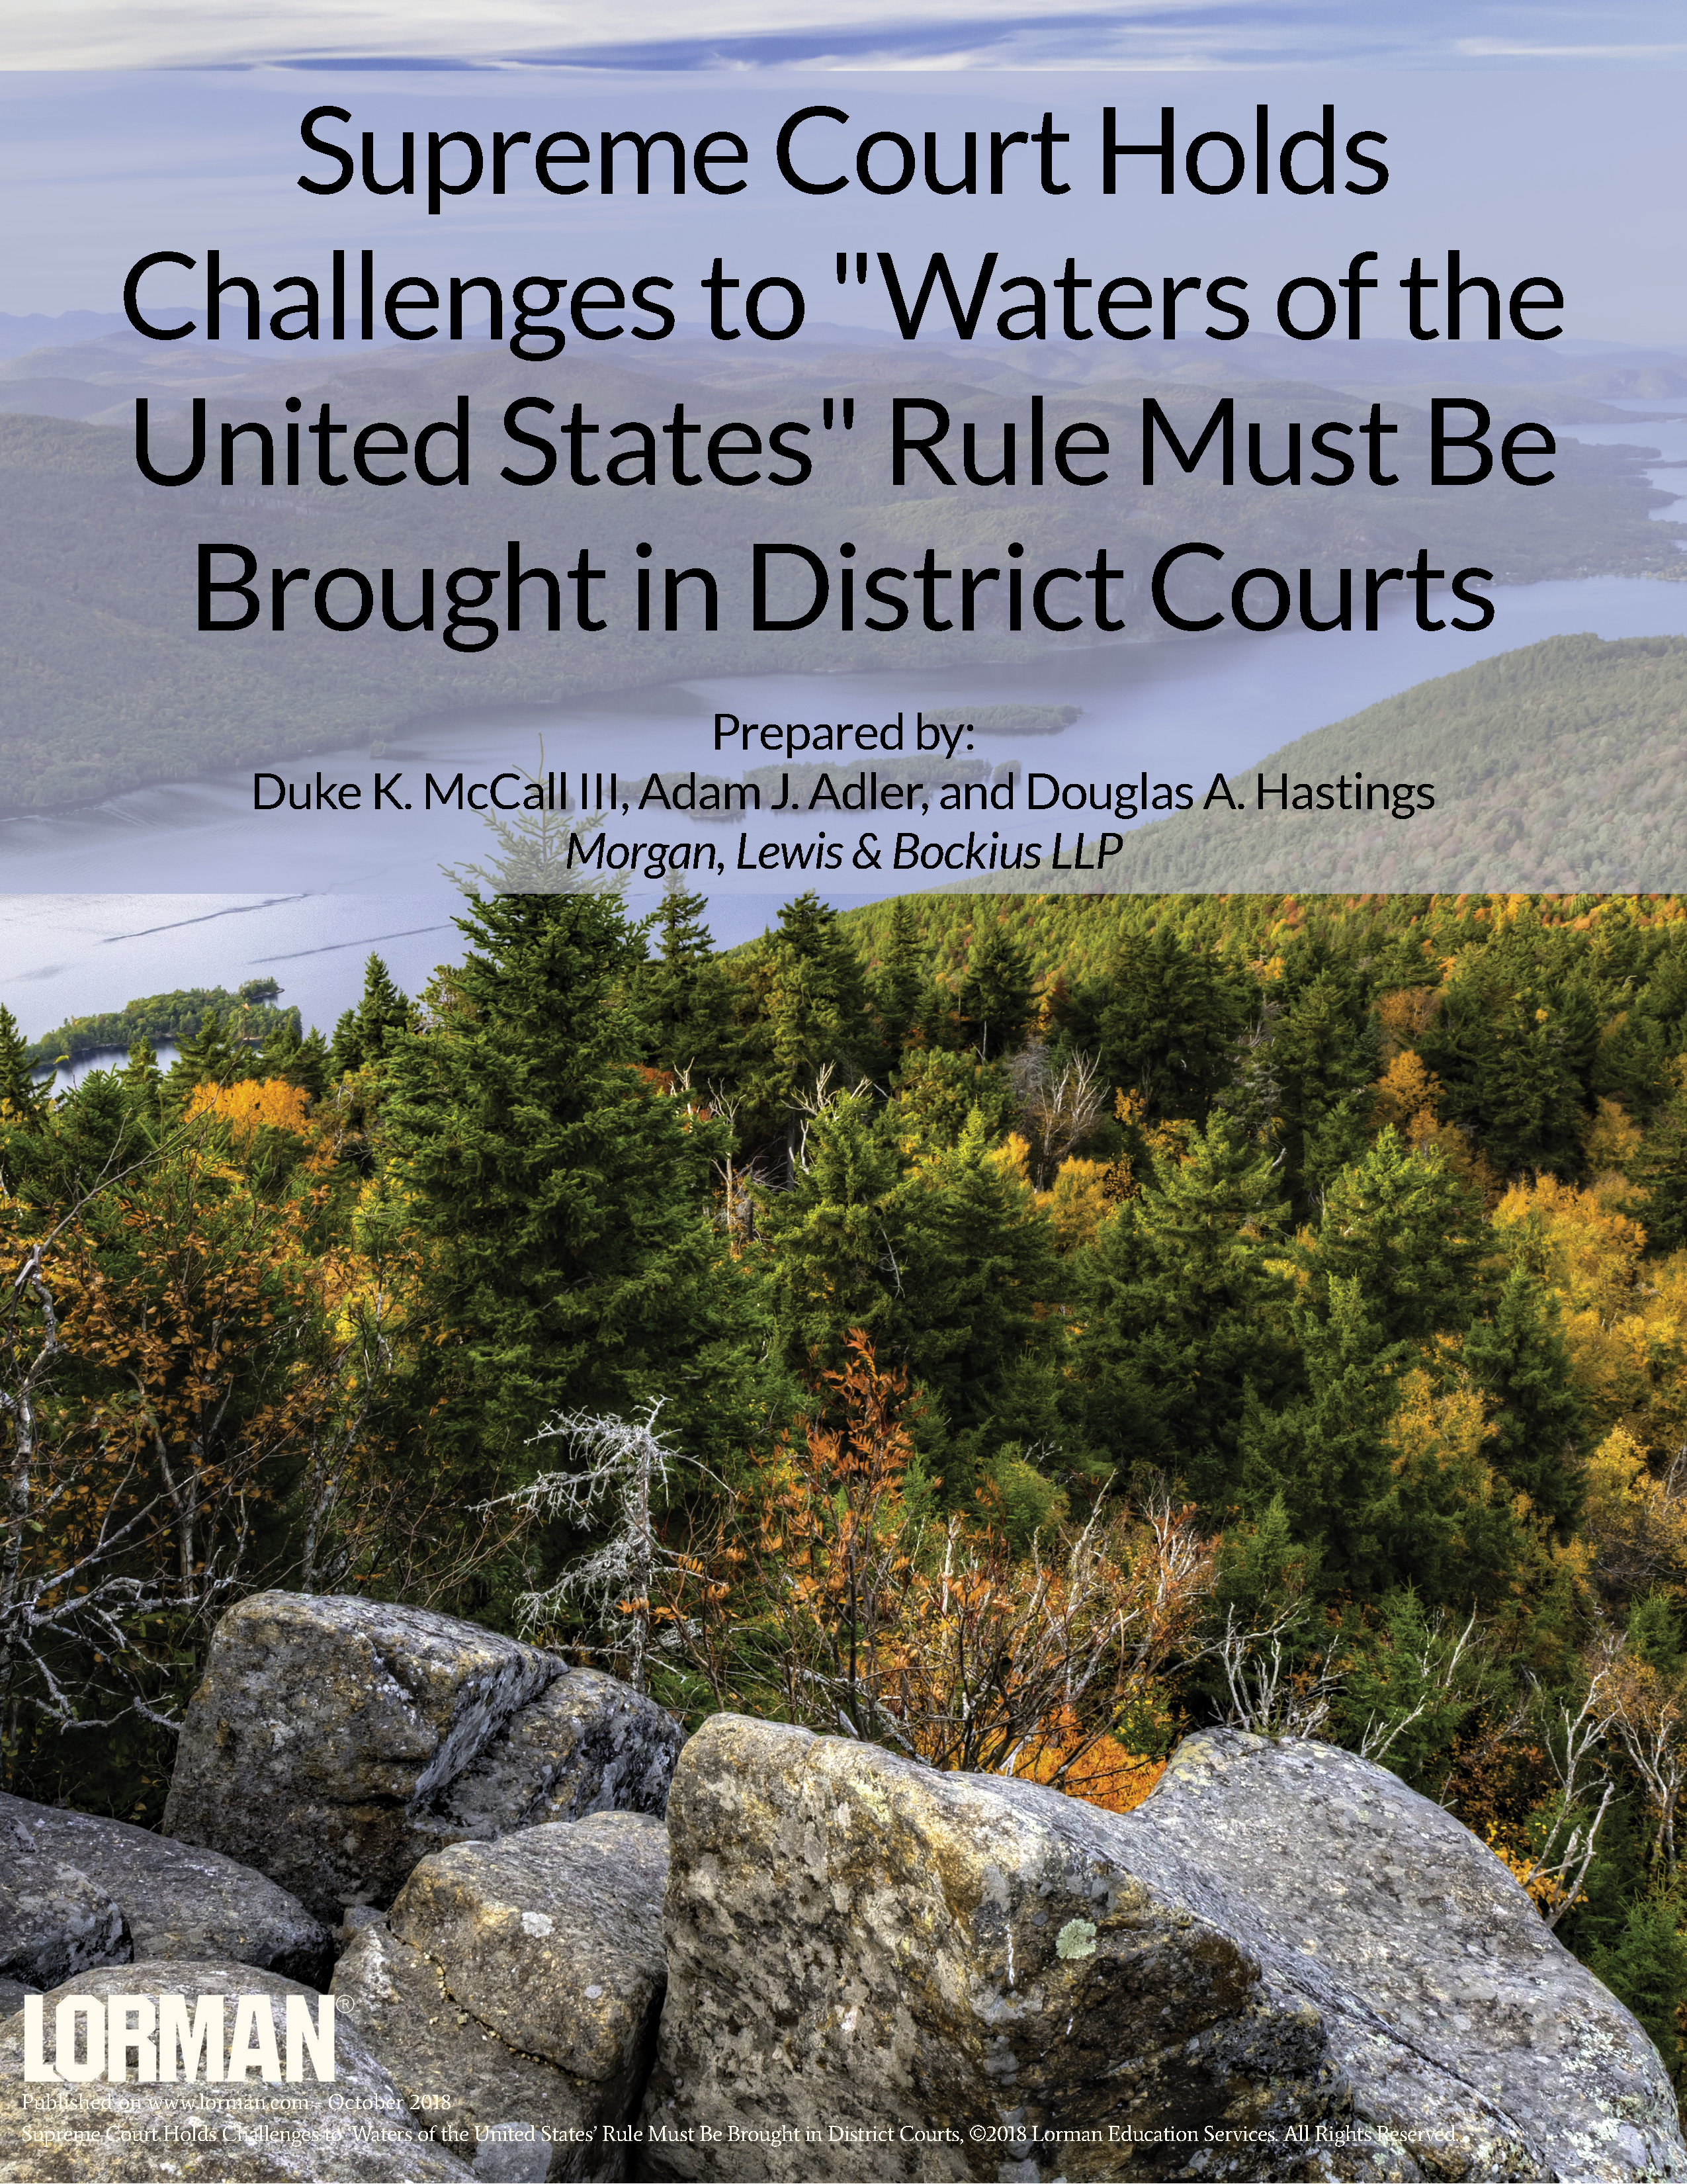 Supreme Court Holds Challenges to Waters of the U.S. Rule Must Be Brought in District Courts